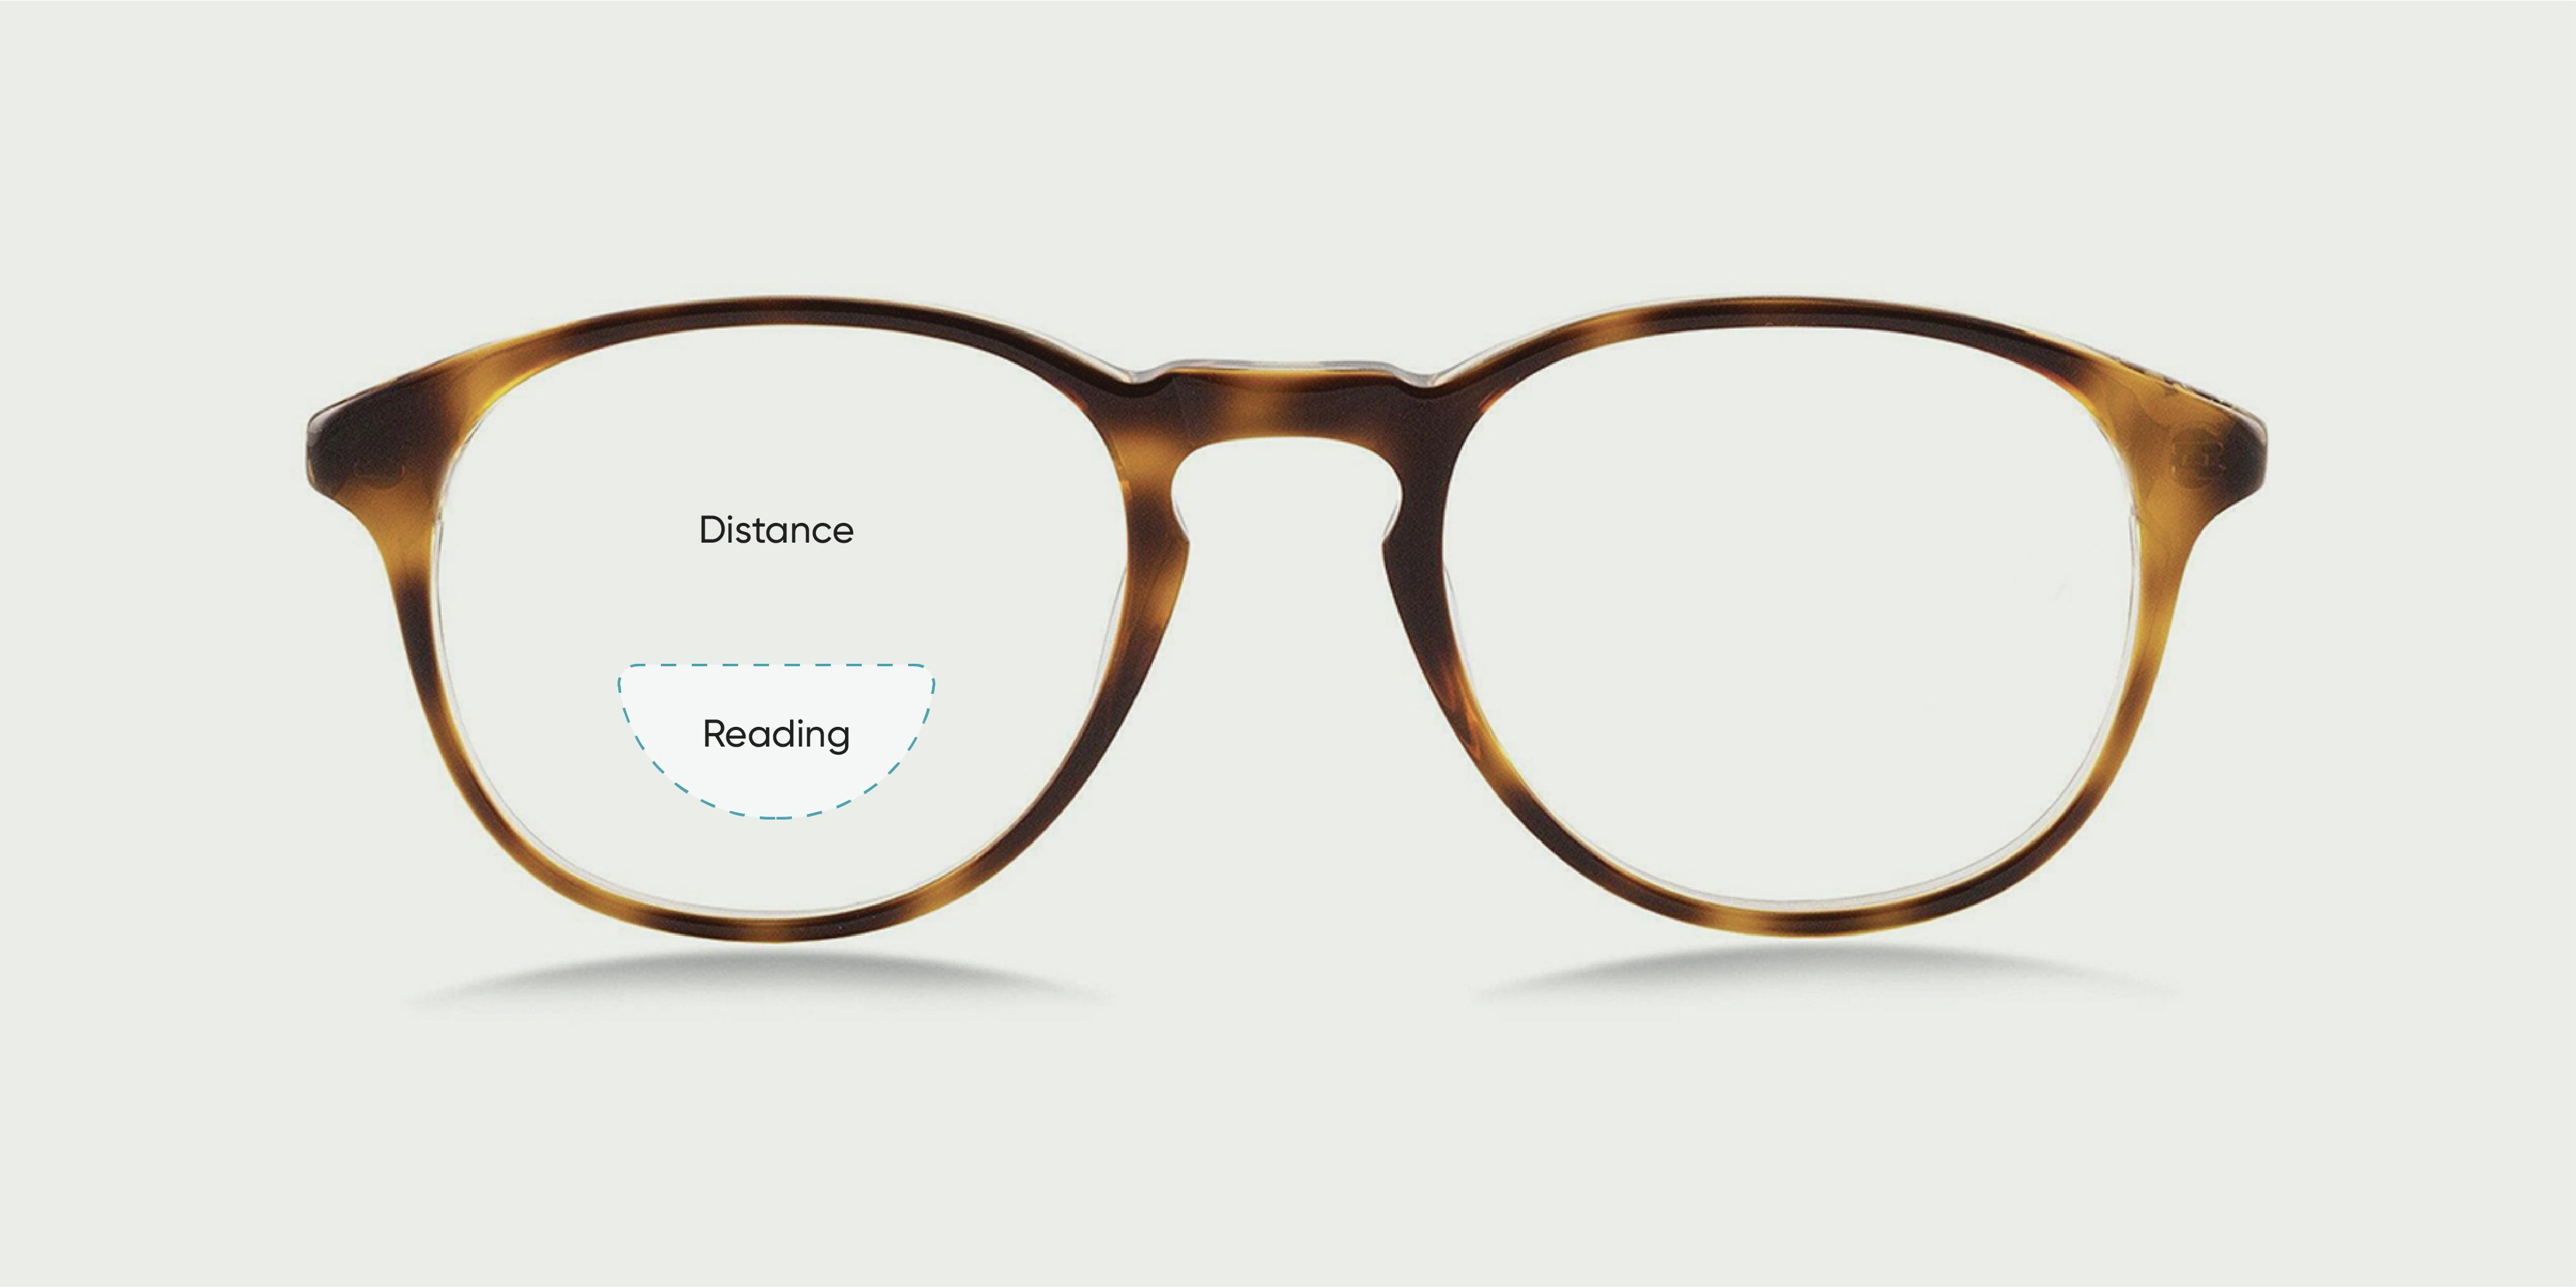 A pair of glasses with a diagram on the lens of the distance and reading portions of a bifocal lens.